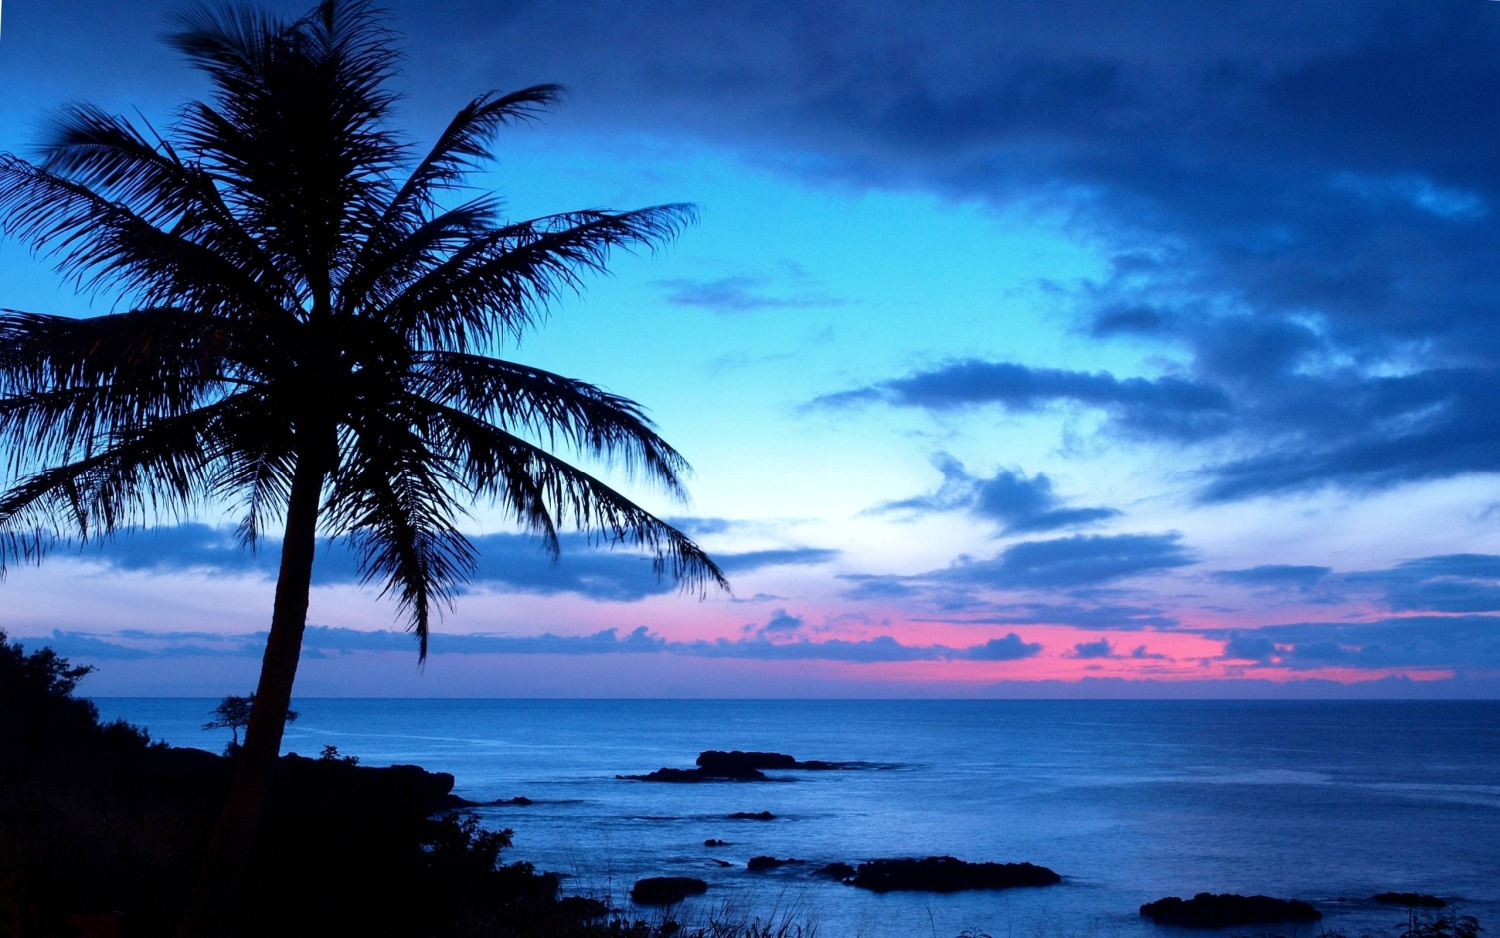 A palm tree overlooking the ocean in Hawaii. Accompanying text reads: "Live Your Music. Blue Hawaii."